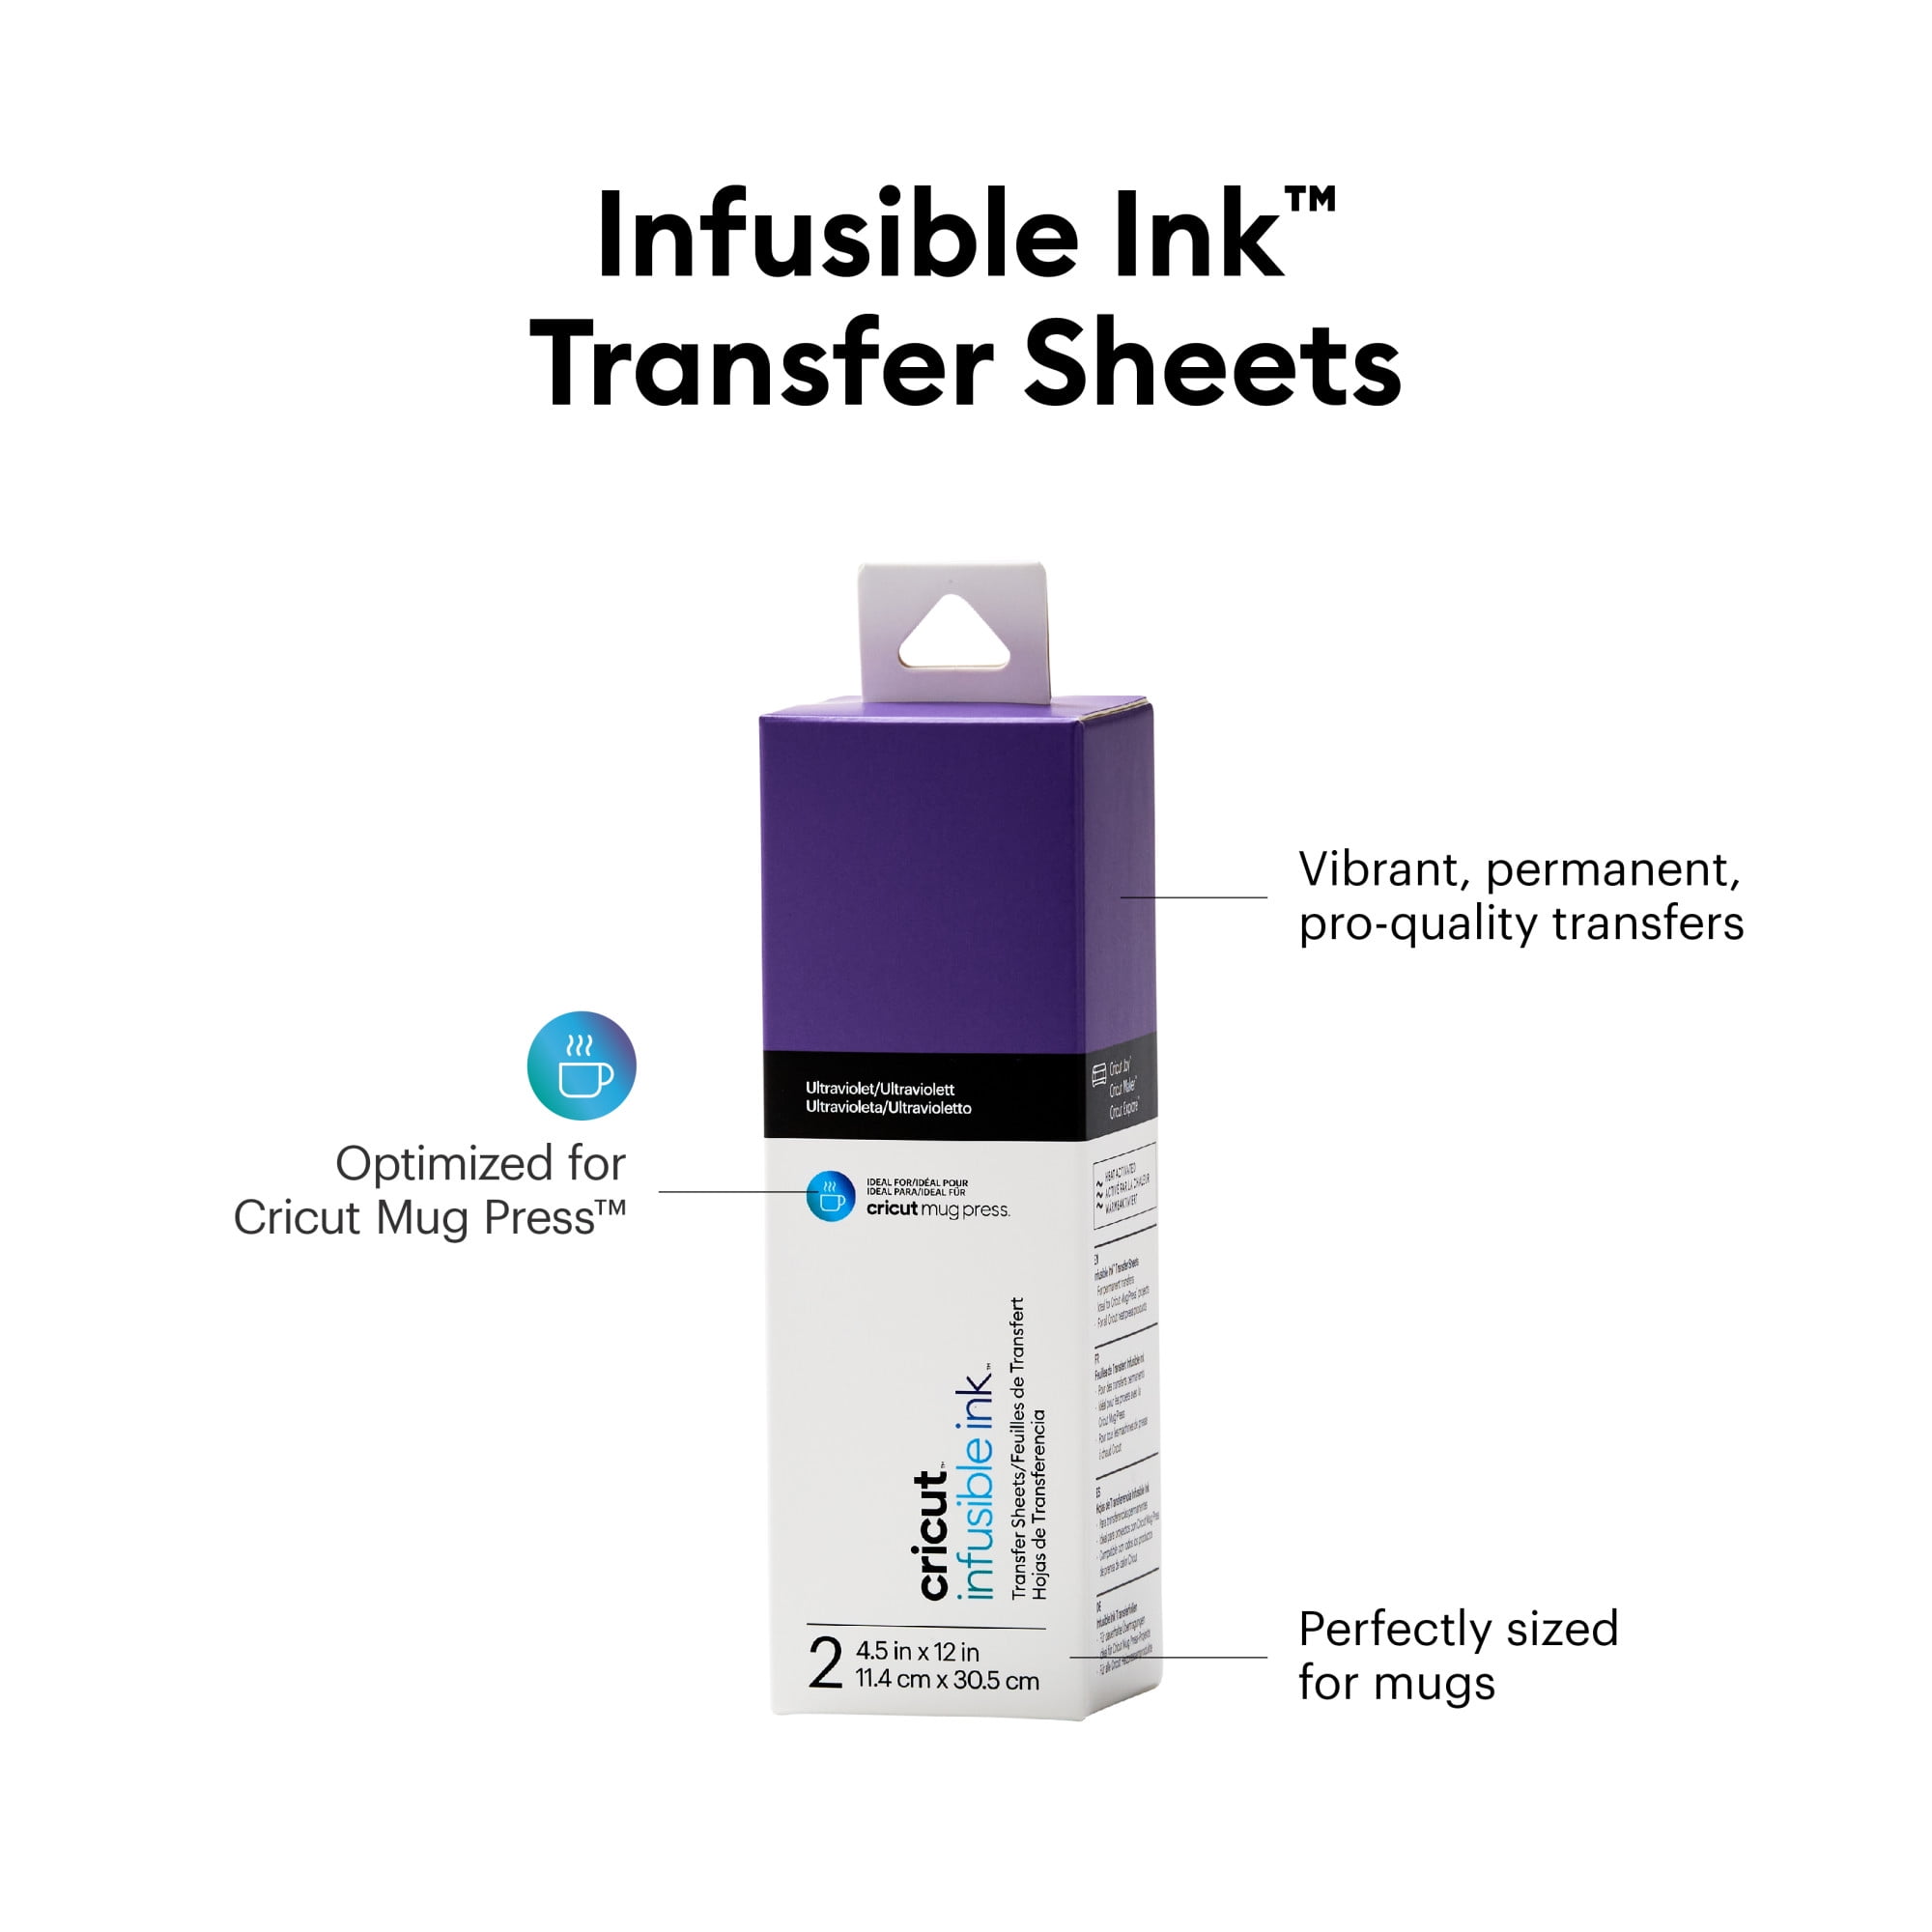 Infusible Ink Transfer Sheet 4-pack - m:ost creative